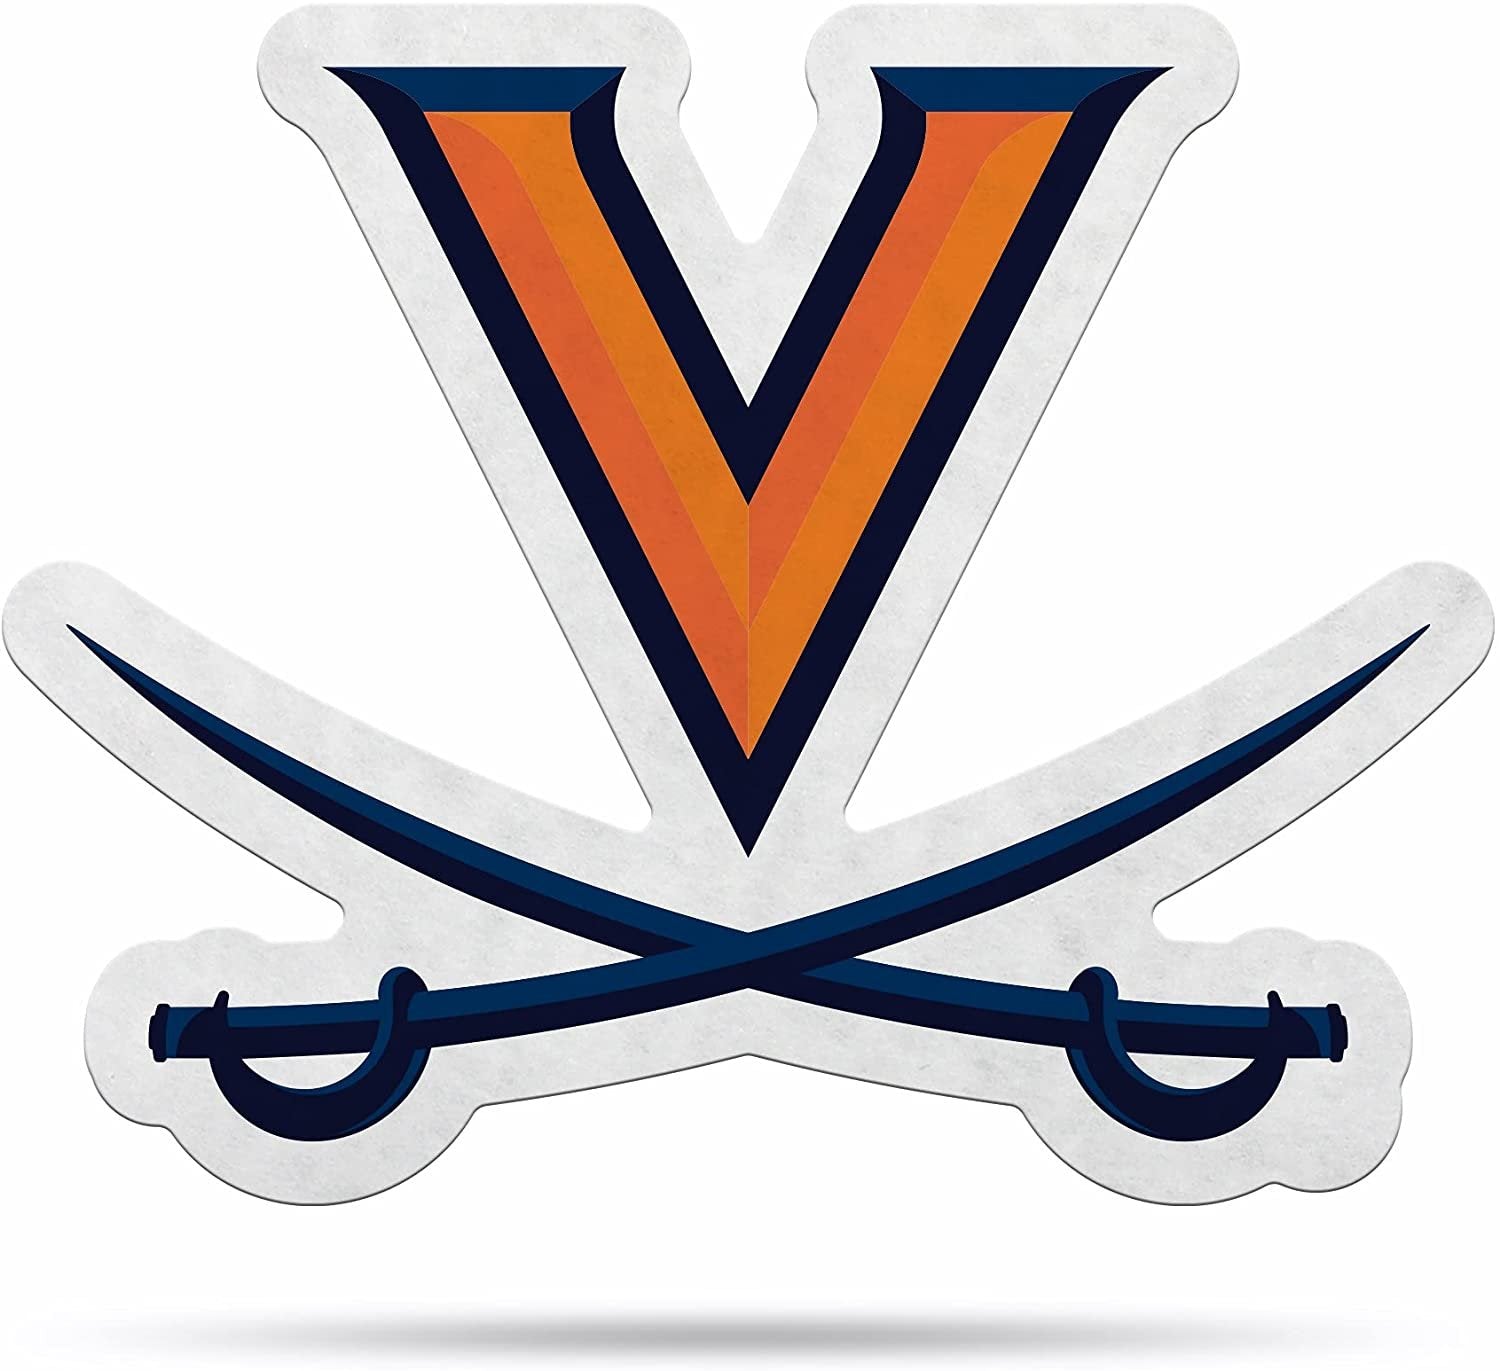 University of Virginia Cavaliers Soft Felt Pennant, Primary Design, Shape Cut, 18 Inch, Easy To Hang